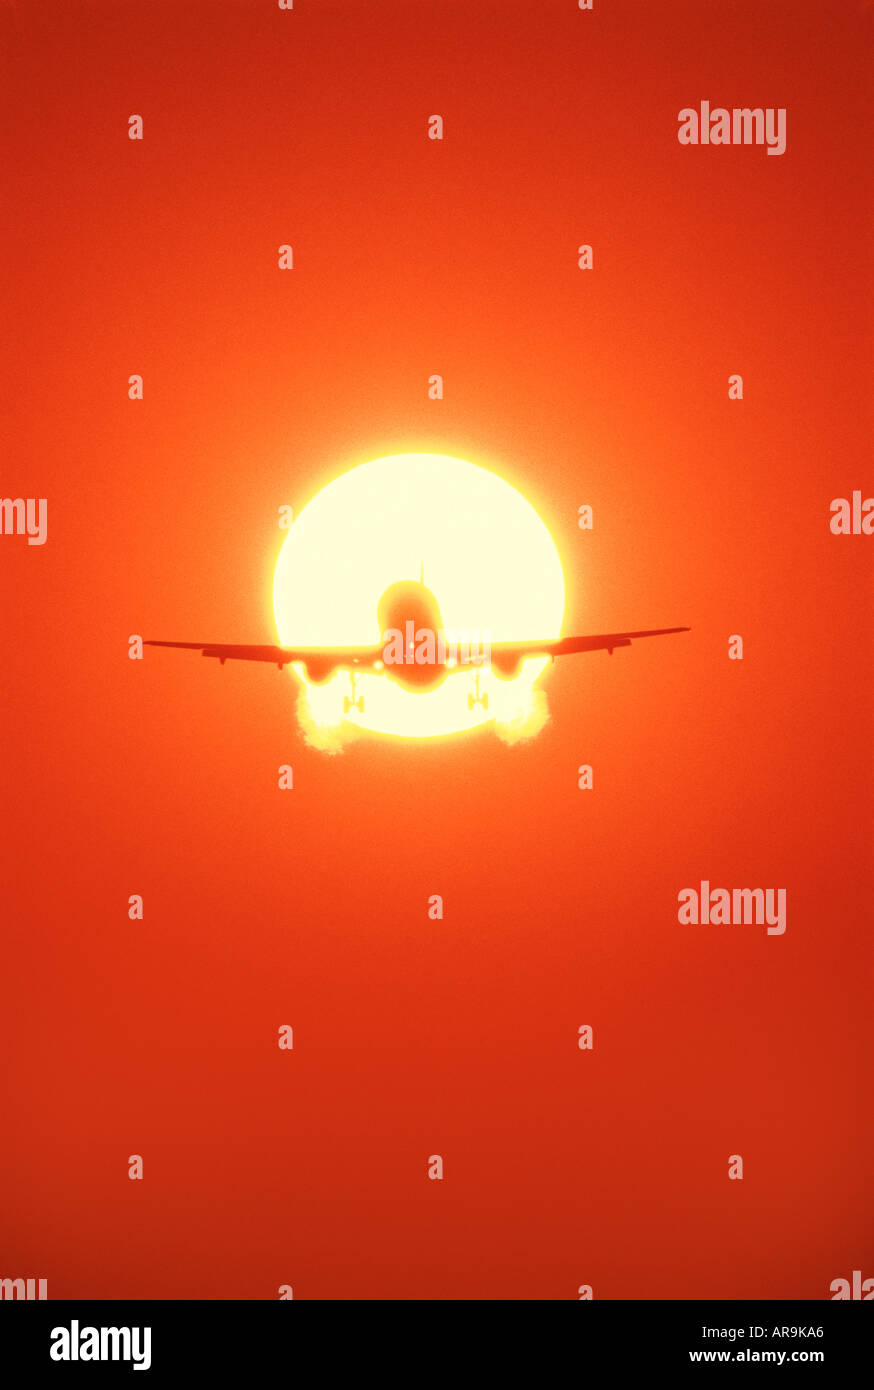 Boeing 757 jet airliner in the air flying in a golden orange ball of fire sky at sunset Stock Photo